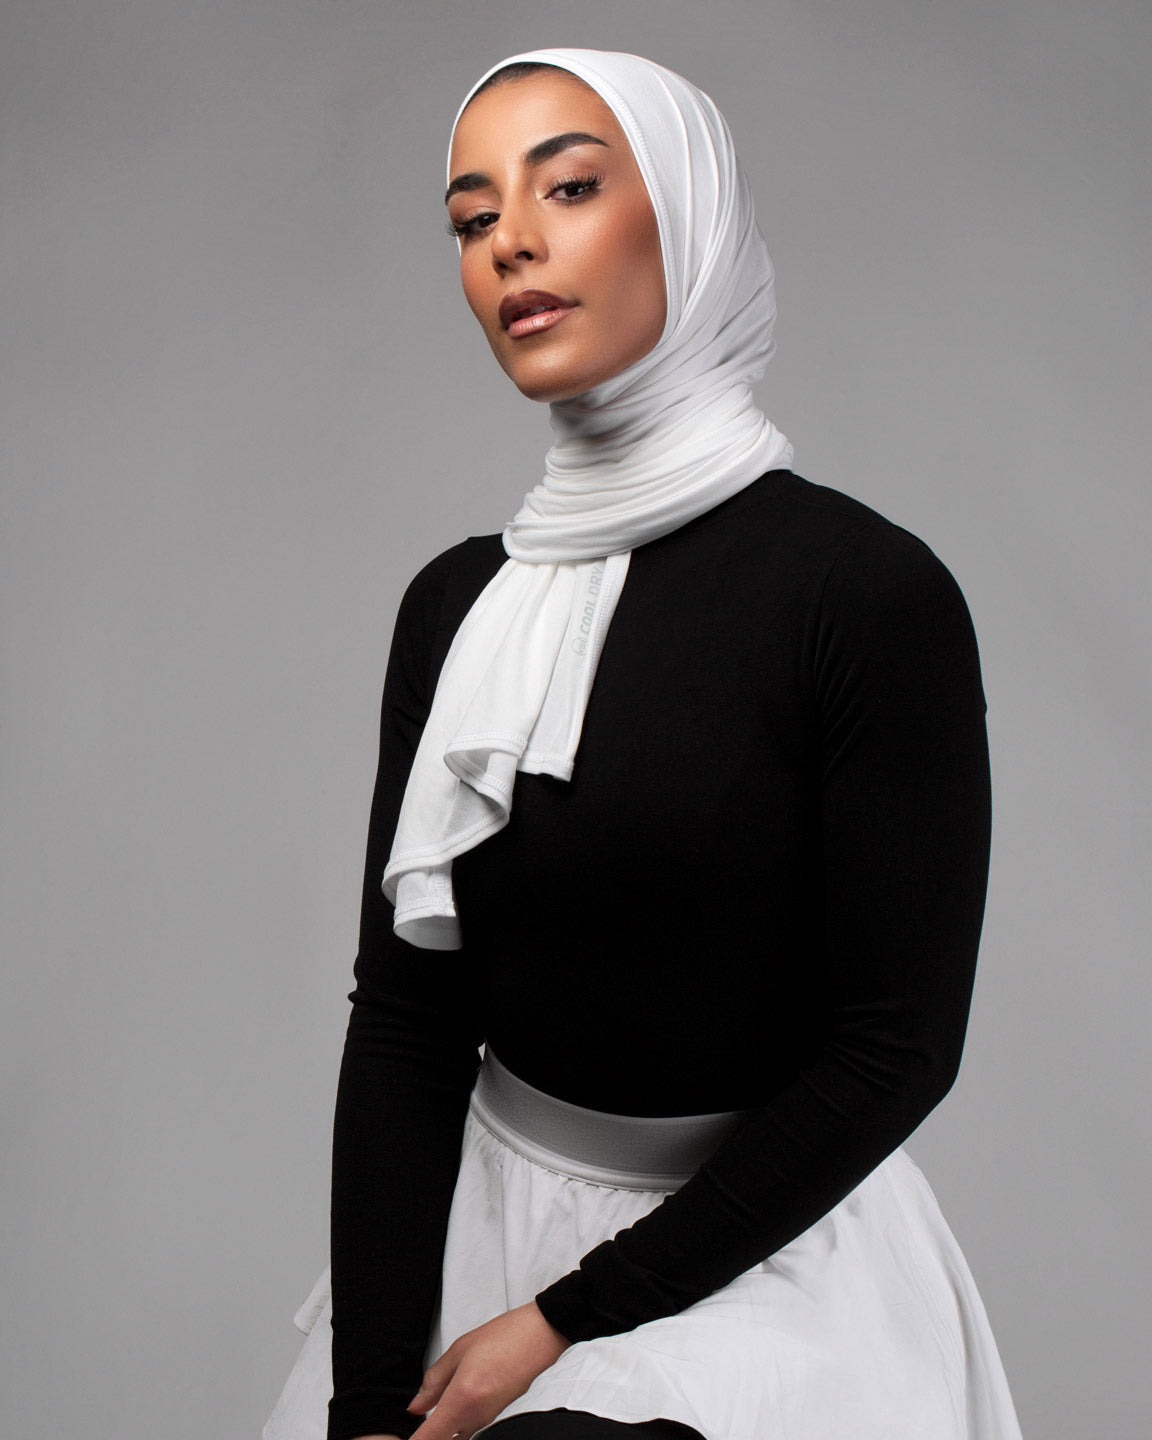 Cool Dry Shawl 2.0 in white by Veil Garments. Sports hijab collection.